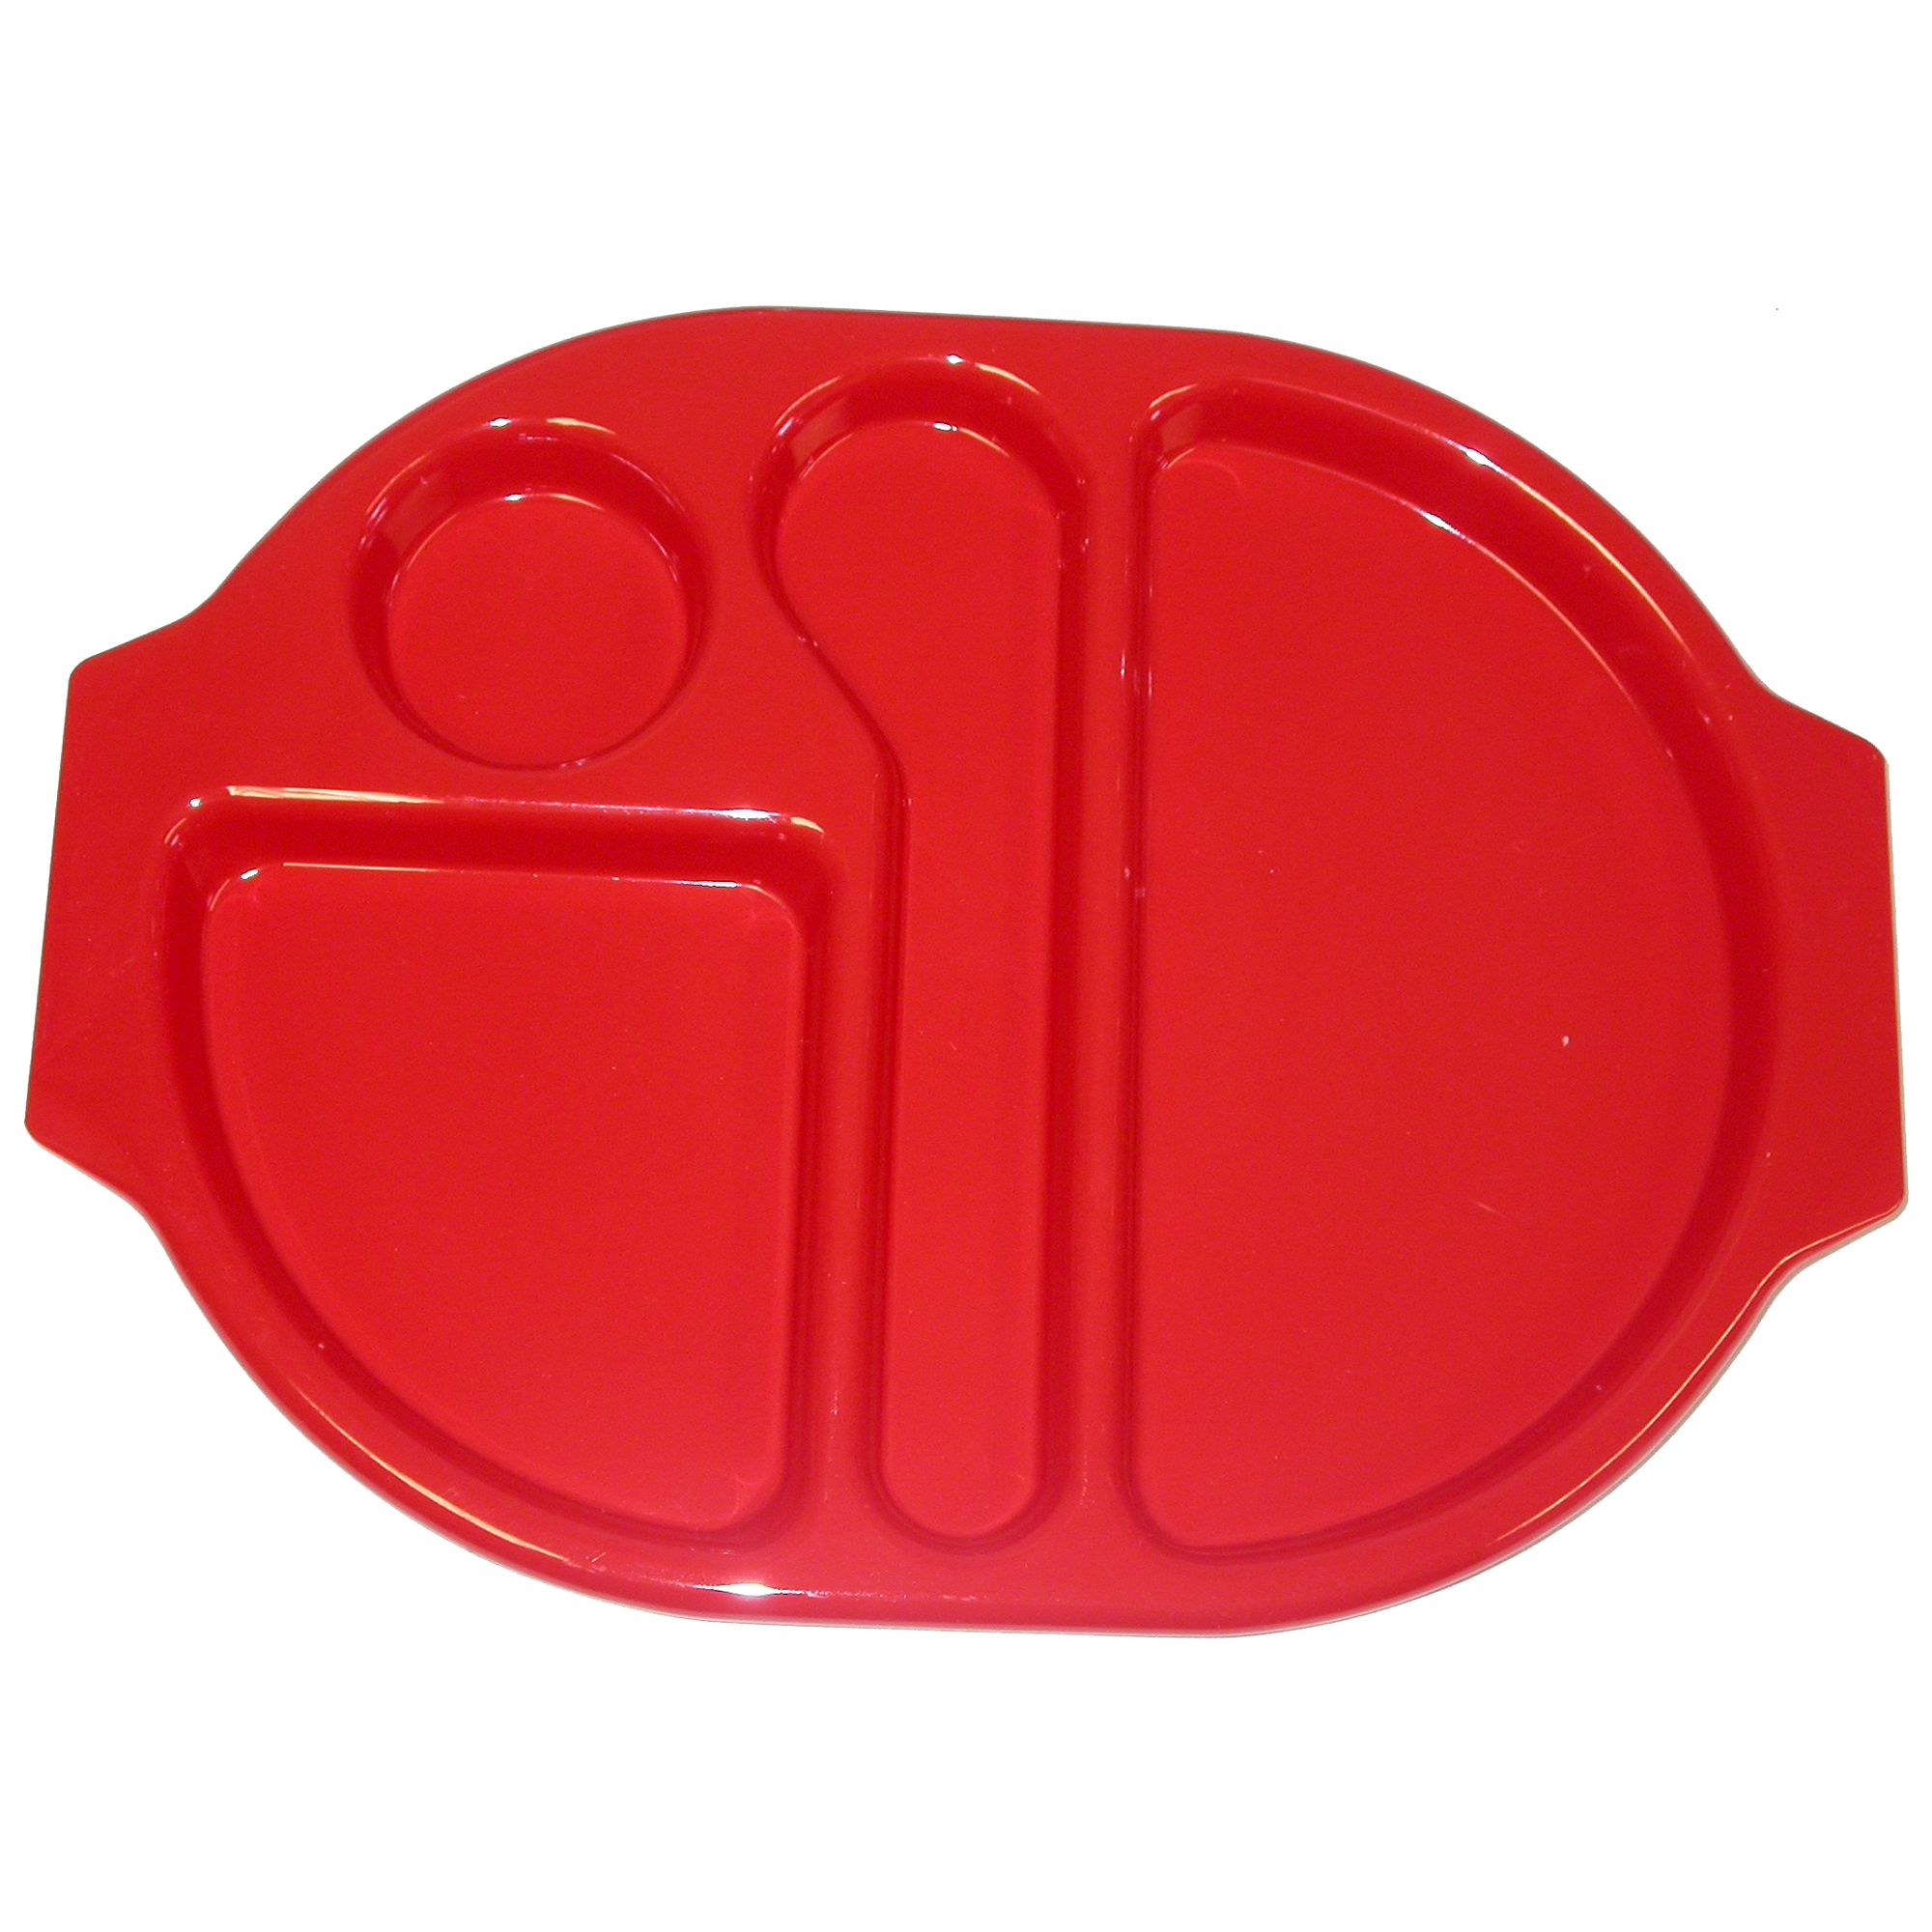 Meal Trays - Large - Red